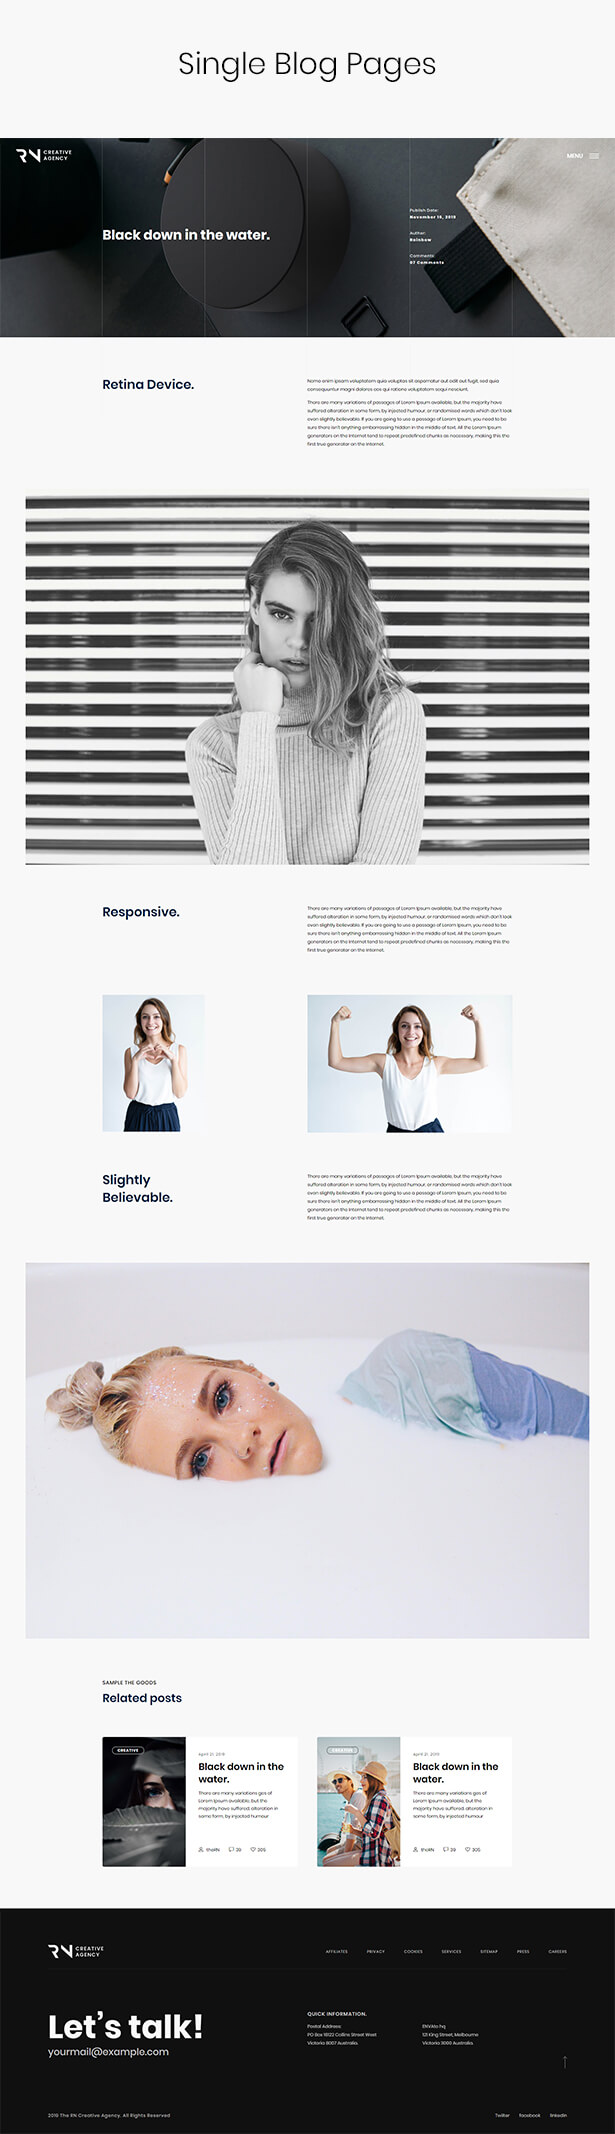 TheRN - Agency HTML Template - 9